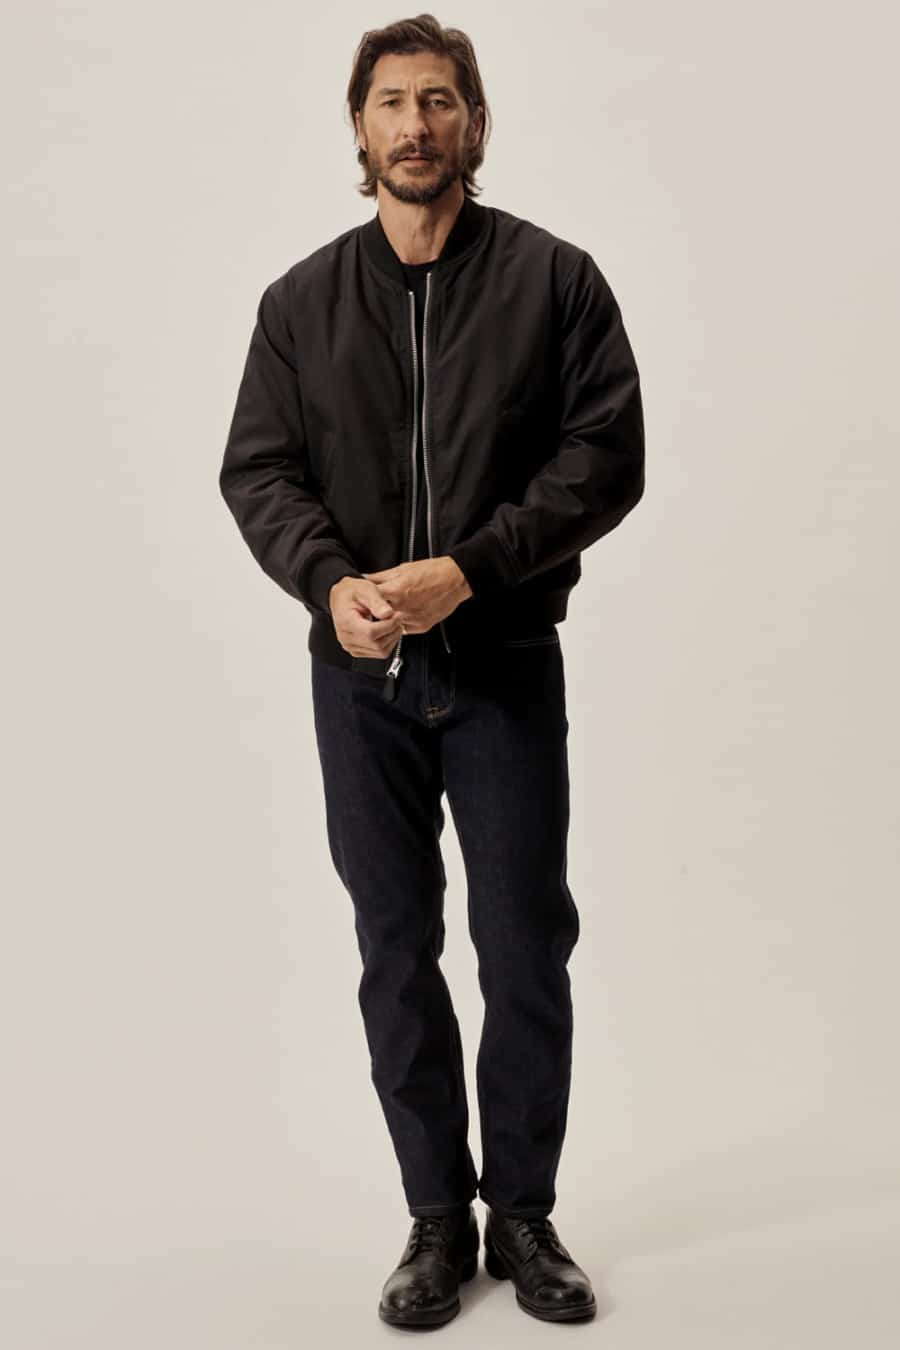 Men's dark raw jeans, black bomber jacket and black boots nightclub outfit